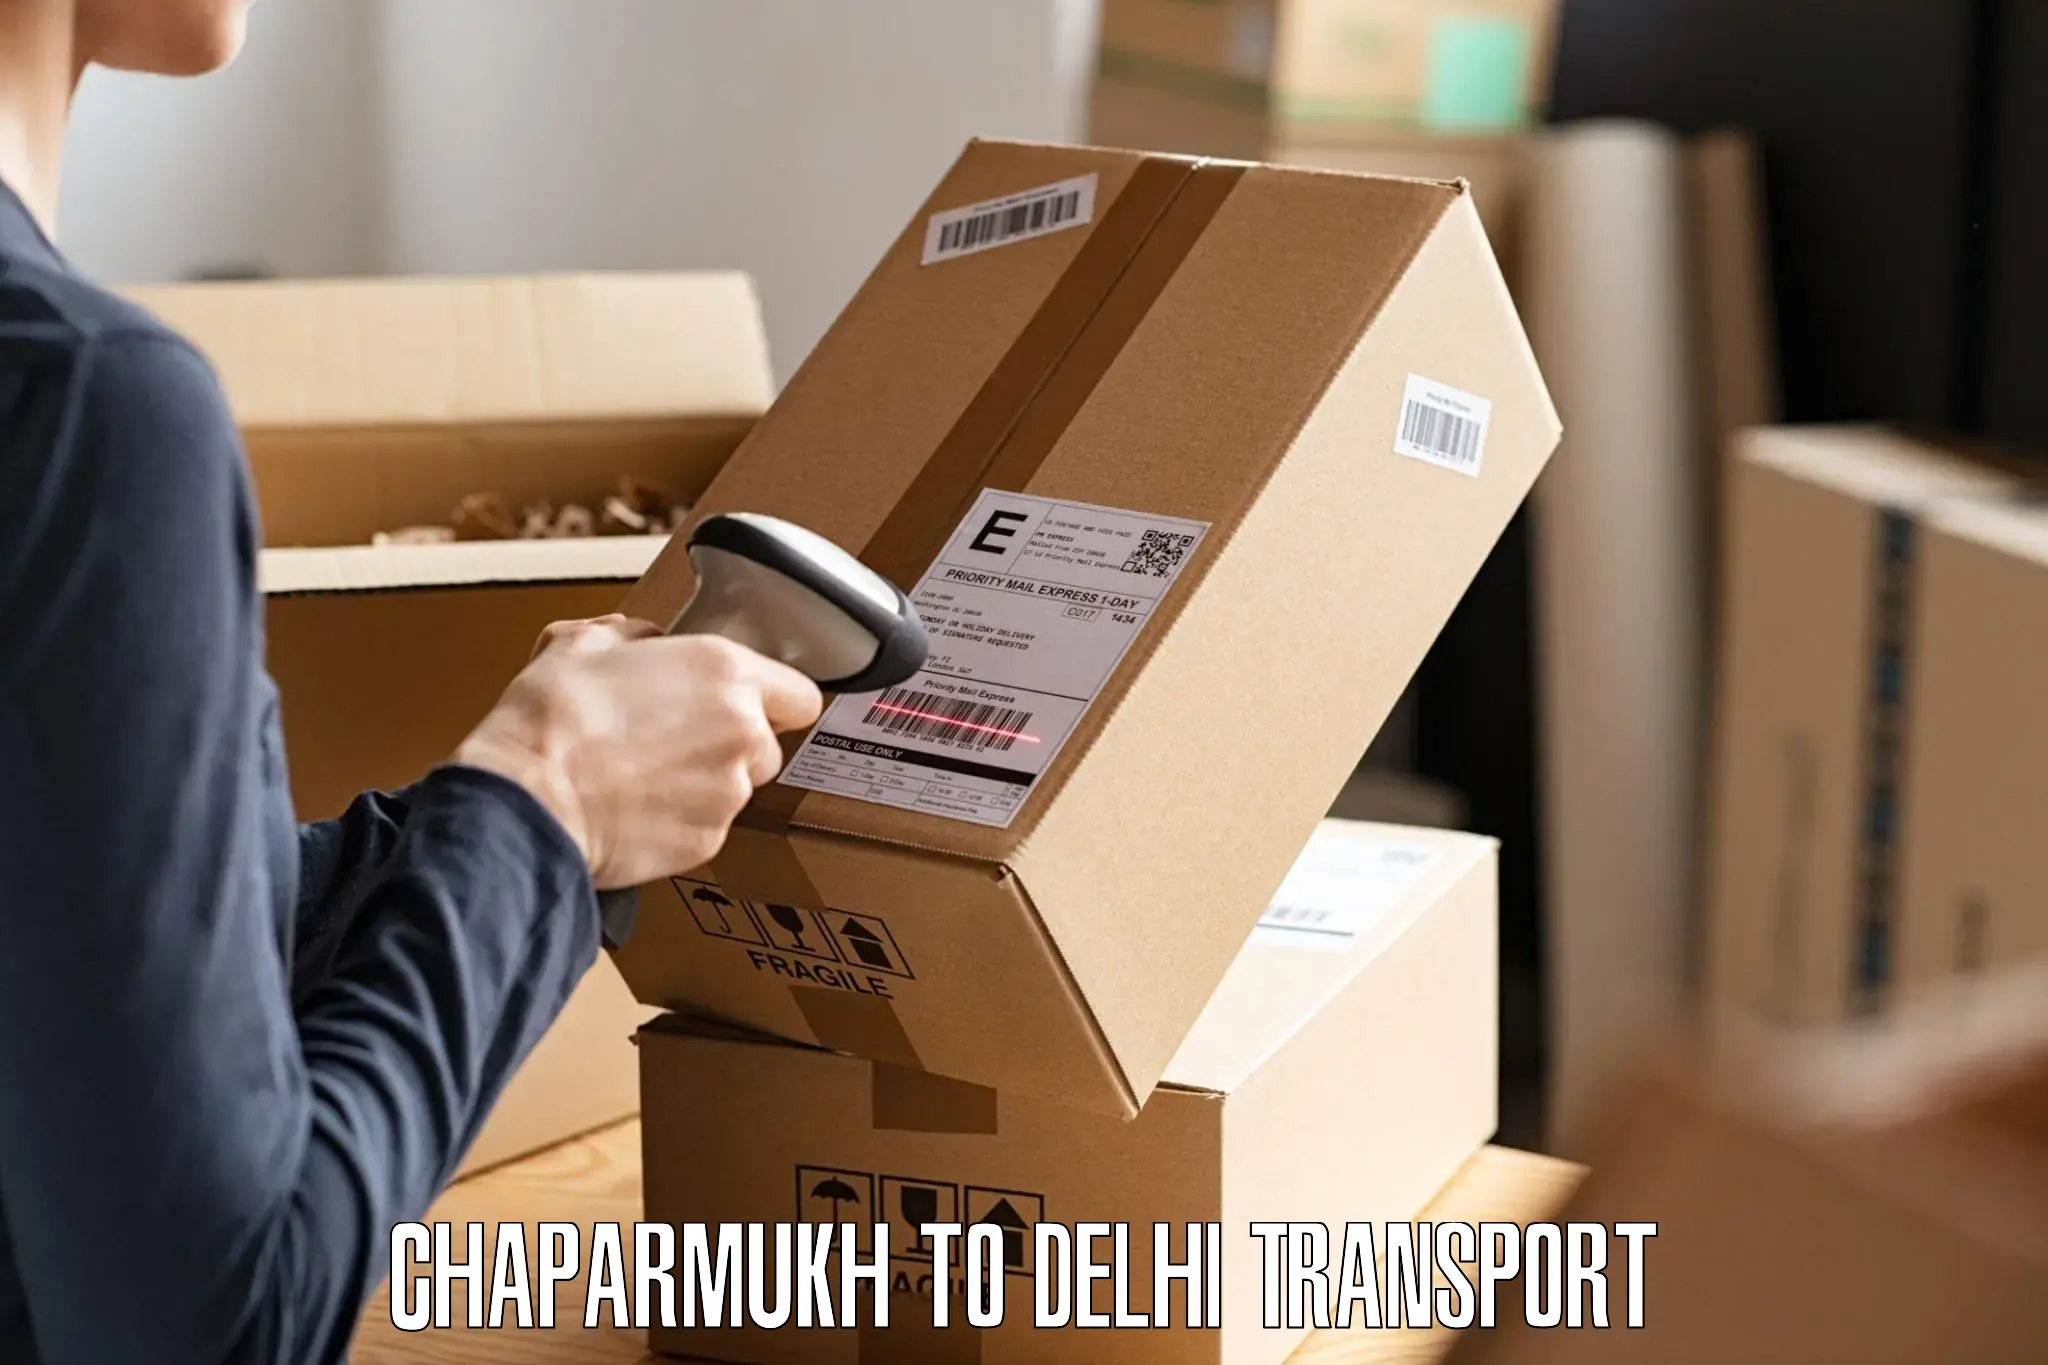 Road transport services Chaparmukh to IIT Delhi